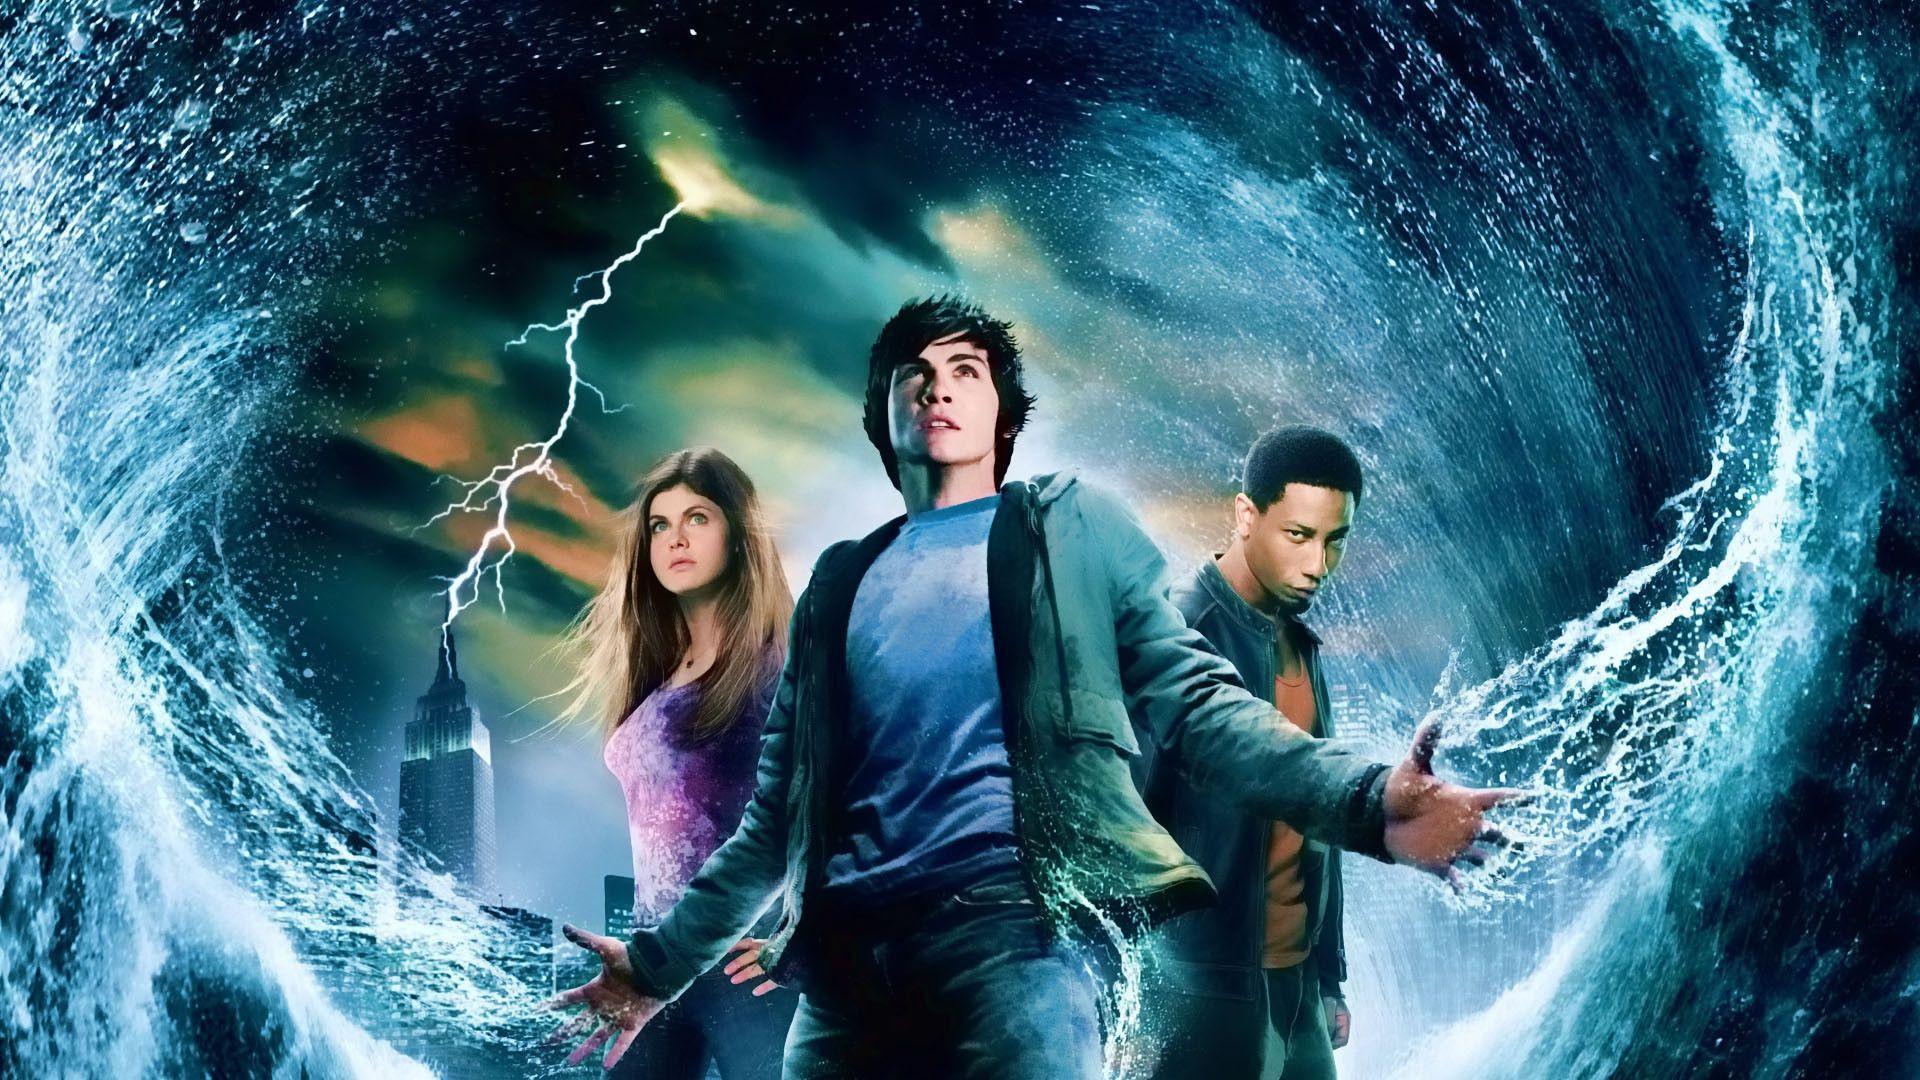 Percy Jackson: The Lightning Thief Photo 19730 HD Picture. Best